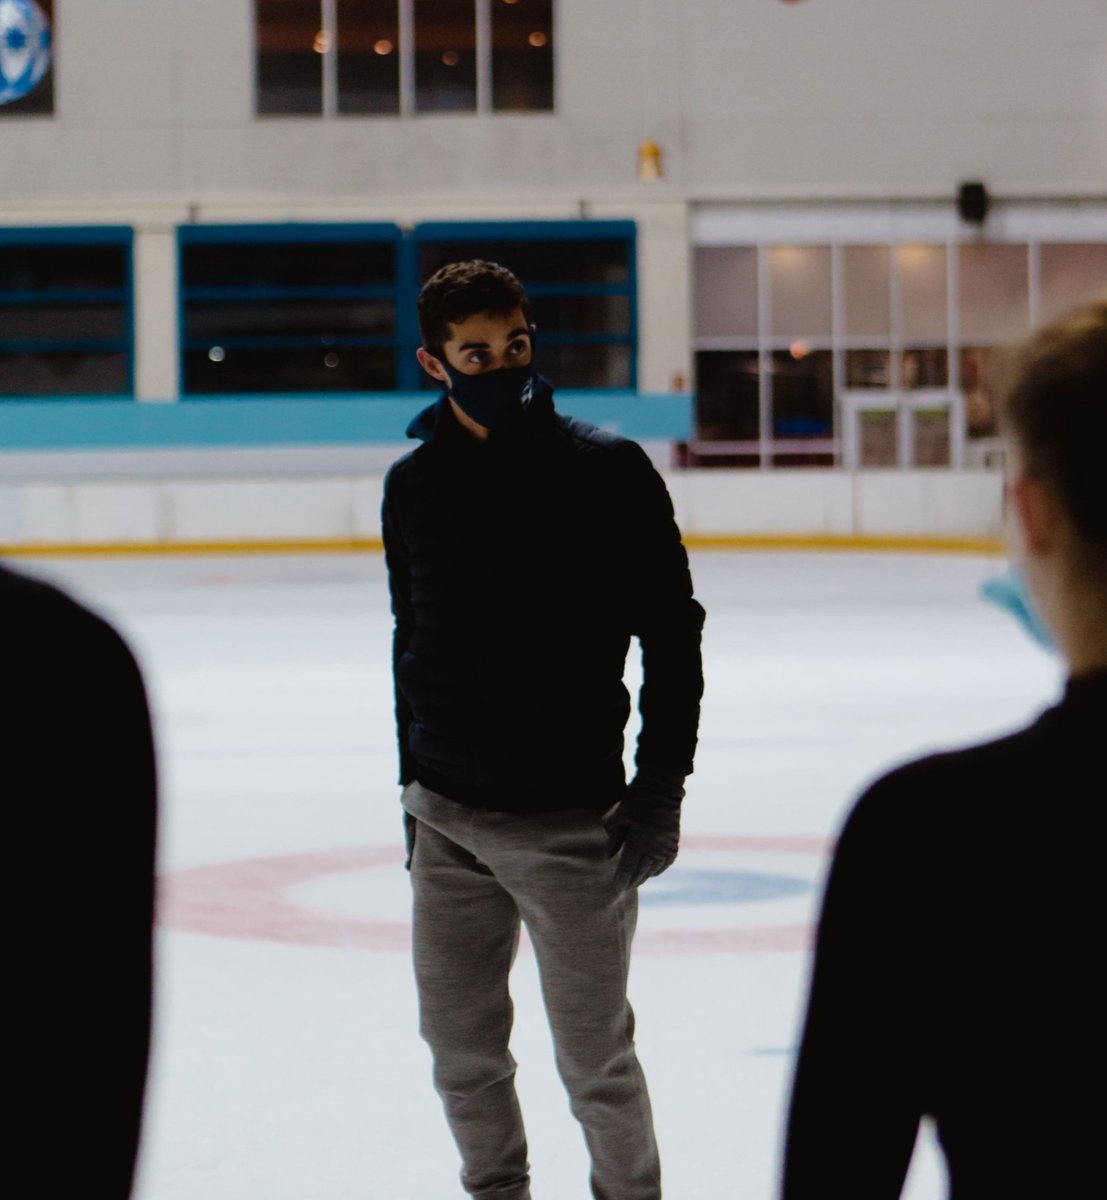 Throw back to #JFACADEMY ⛸️⛸️⛸️